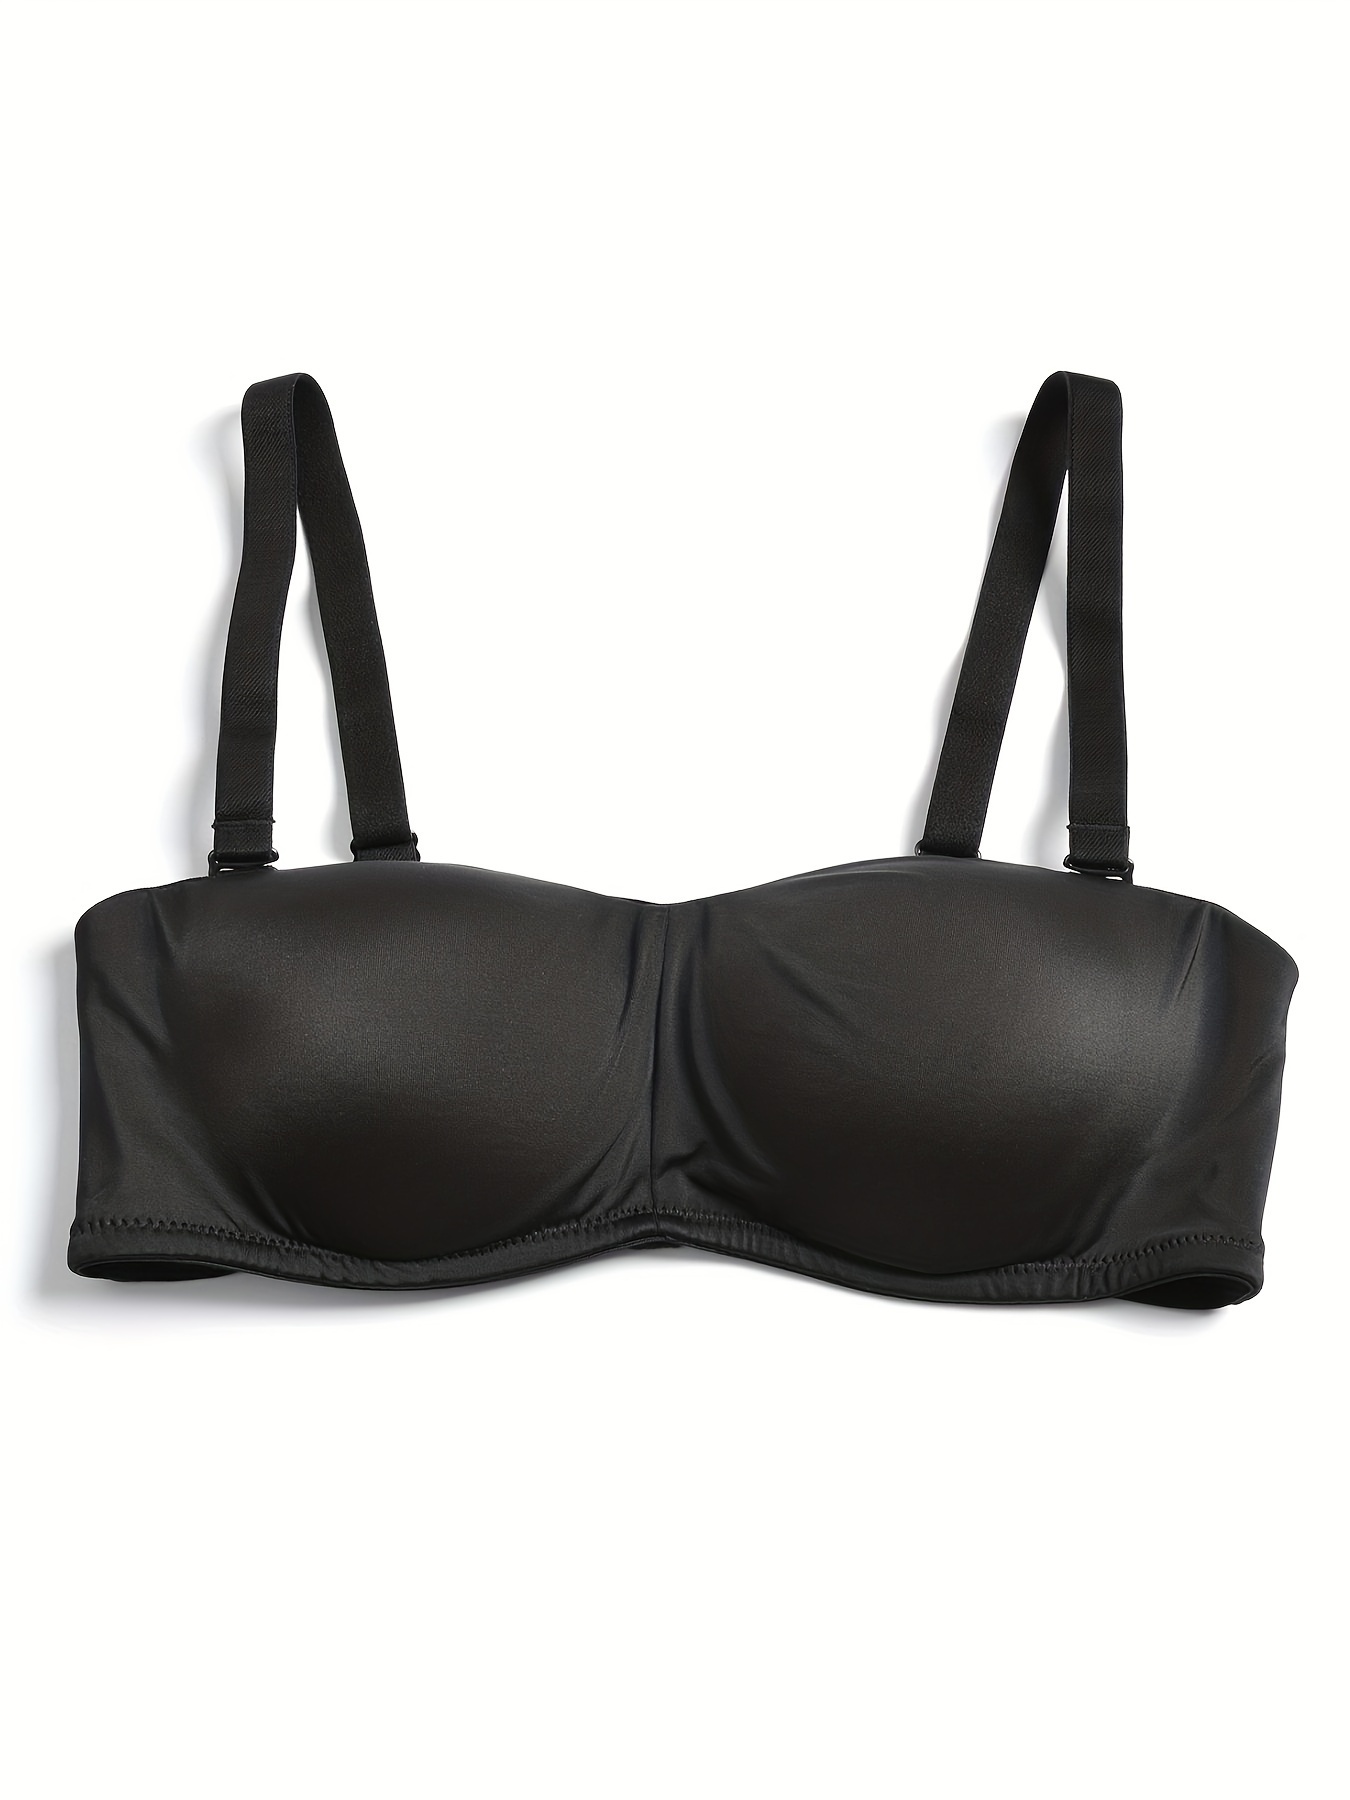 Plus Size Strapless Bra with pads for Women Padded Tube Bandeau Tube Bra  with Foam Big Size [Black a